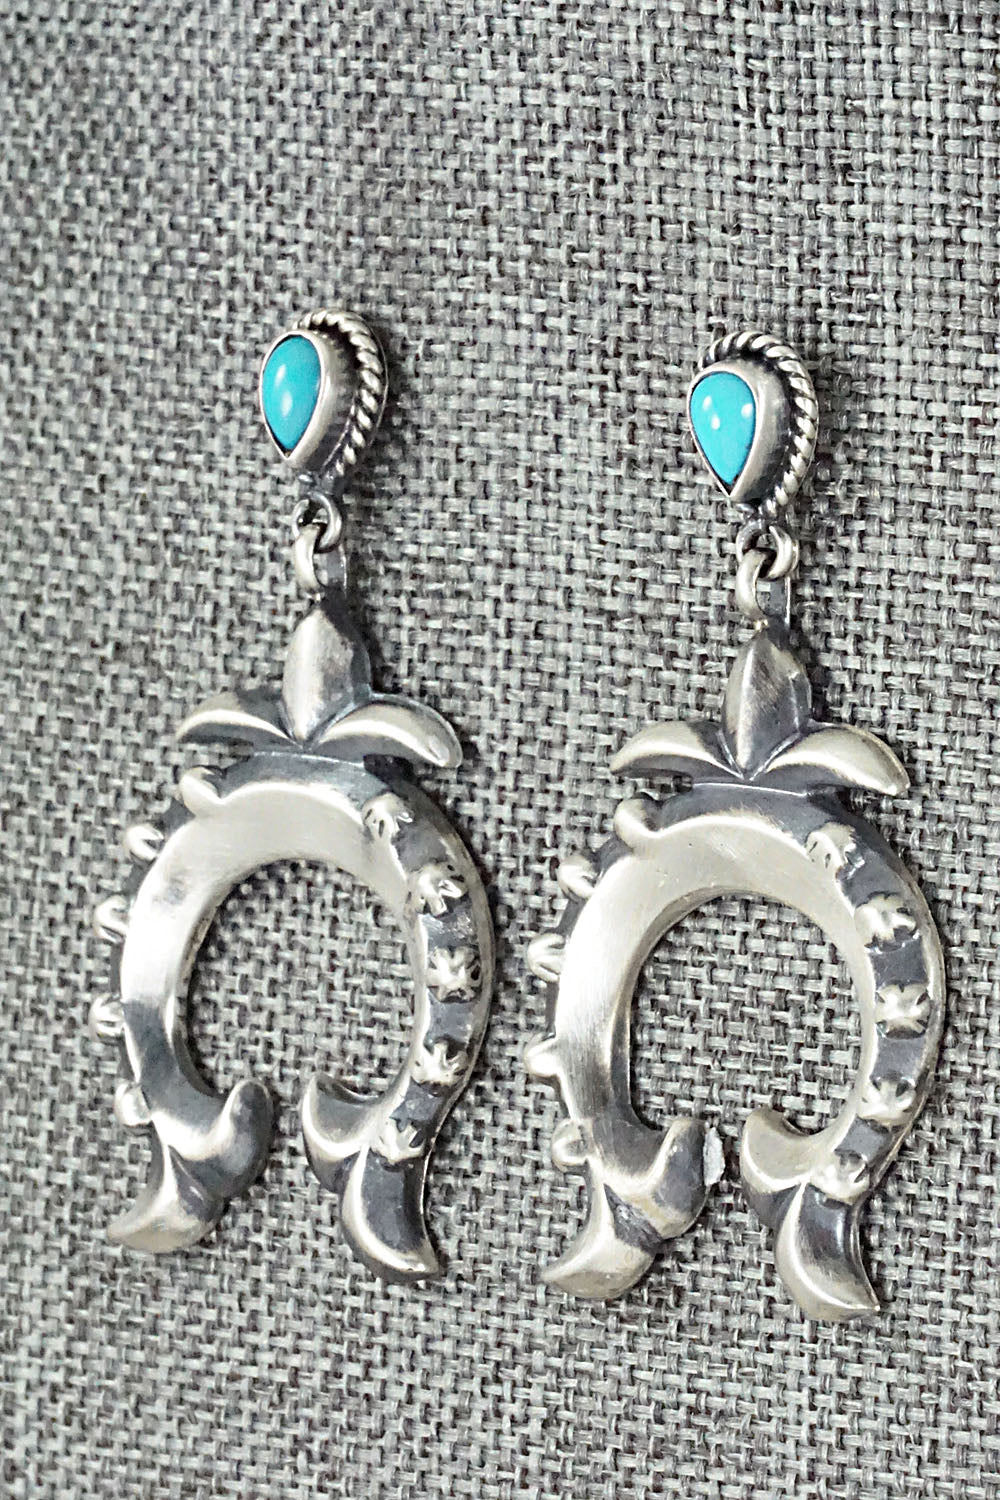 Turquoise & Sterling Silver Earrings - Lee Shorty